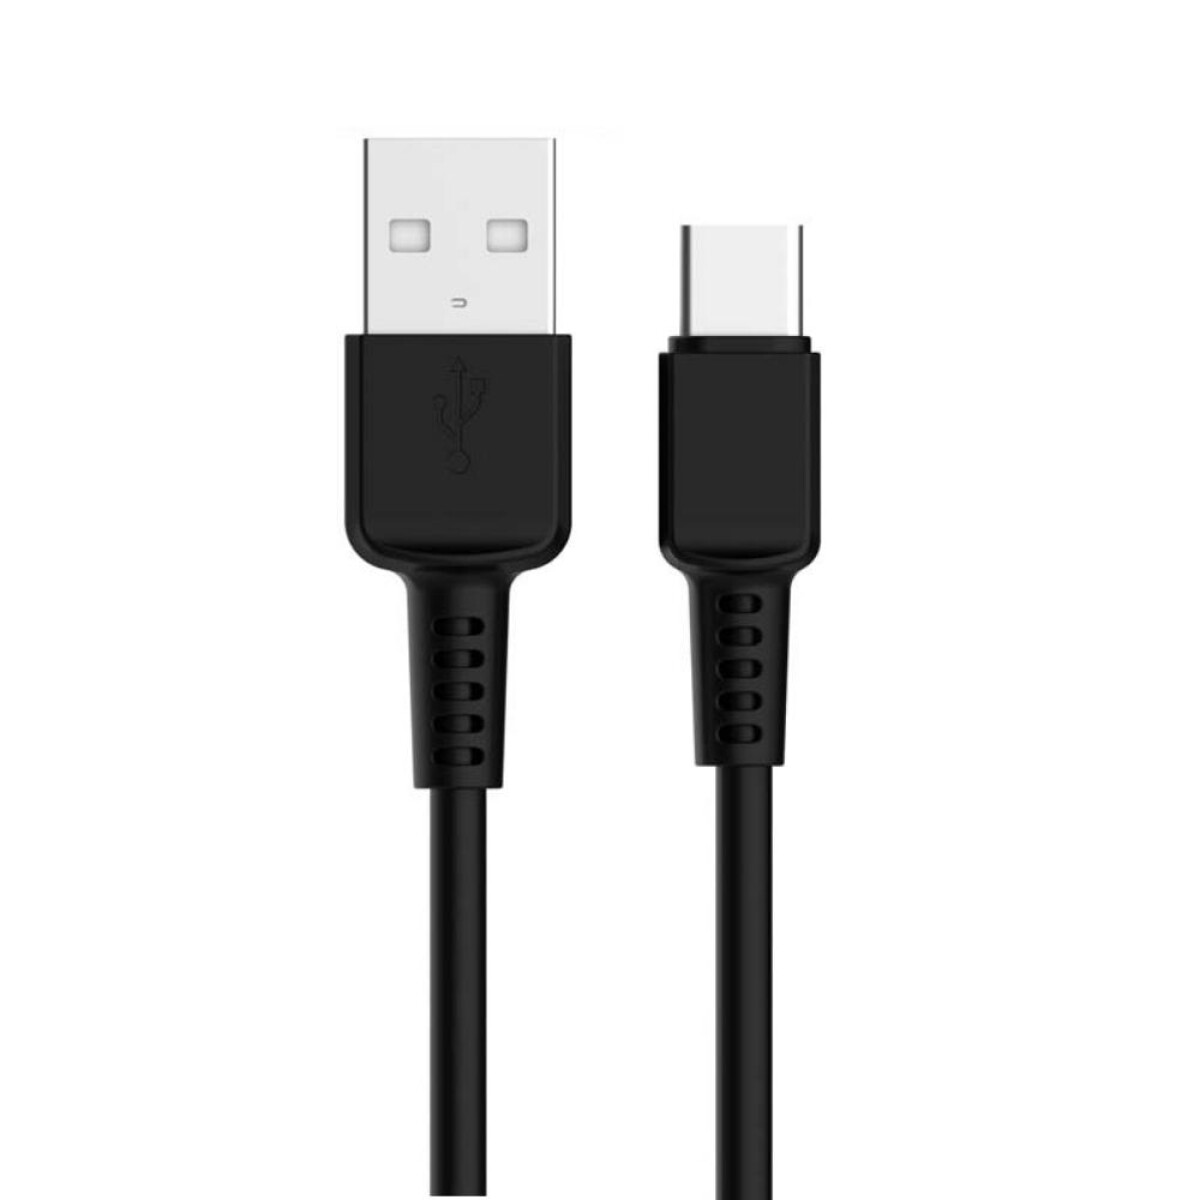 Cable USB PAH! Tipo C - Negro 